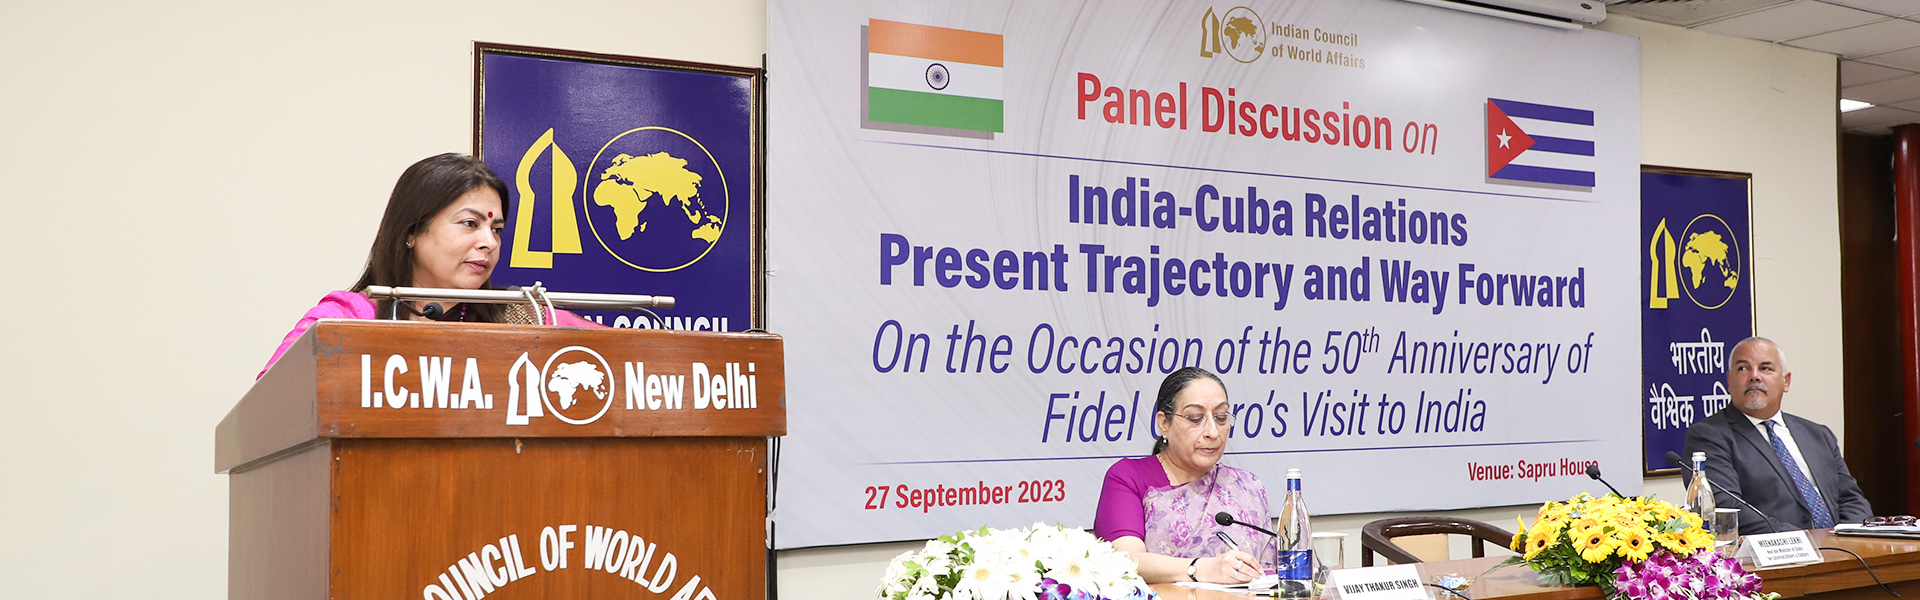 H.E. Smt. Meenakashi Lekhi, Honorable Minister of State for External Affairs and Culture, Government of India delivering keynote address at the Panel Discussion on “India-Cuba Relations: Present Trajectory and Way Forward” on the Occasion of the 50th Anniversary of Fidel Castros Visit to India, 27 September 2023.